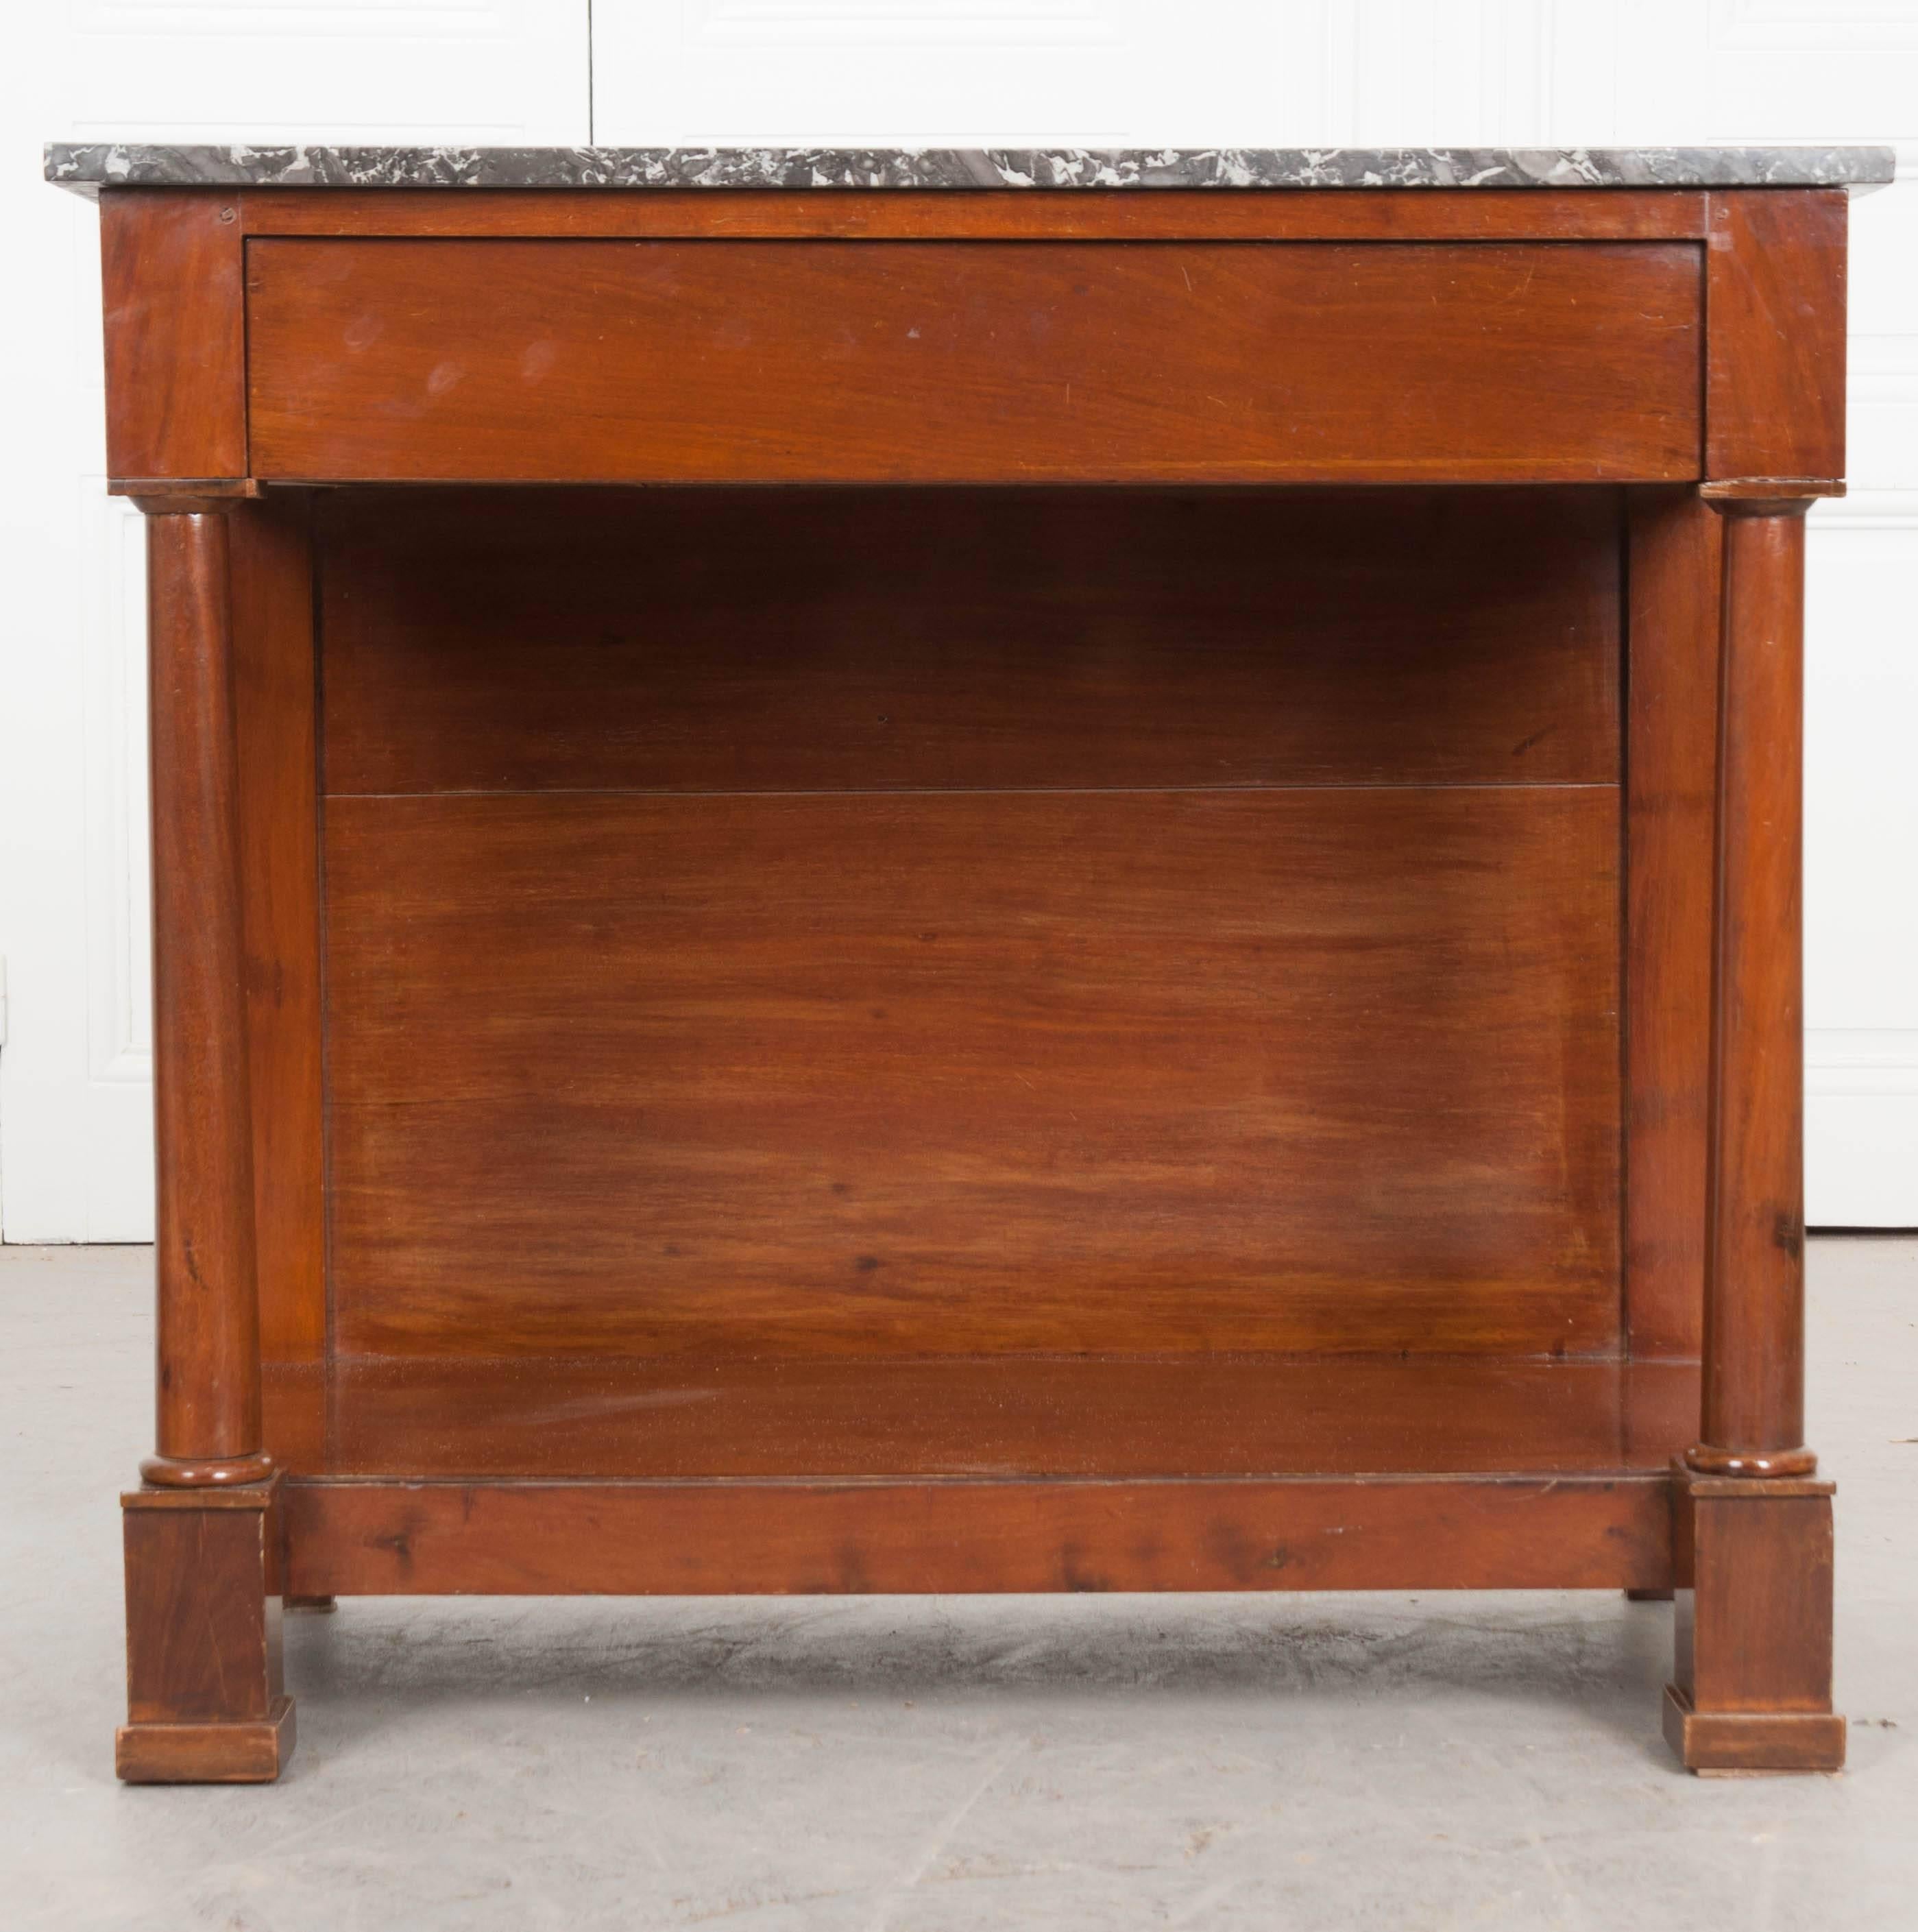 A French 19th century mahogany console with Empirical style and marble top. The gray marble top is in wonderful antique condition, with the front and sides being finished. The apron houses a hidden drawer, providing out-of-sight storage. The top is